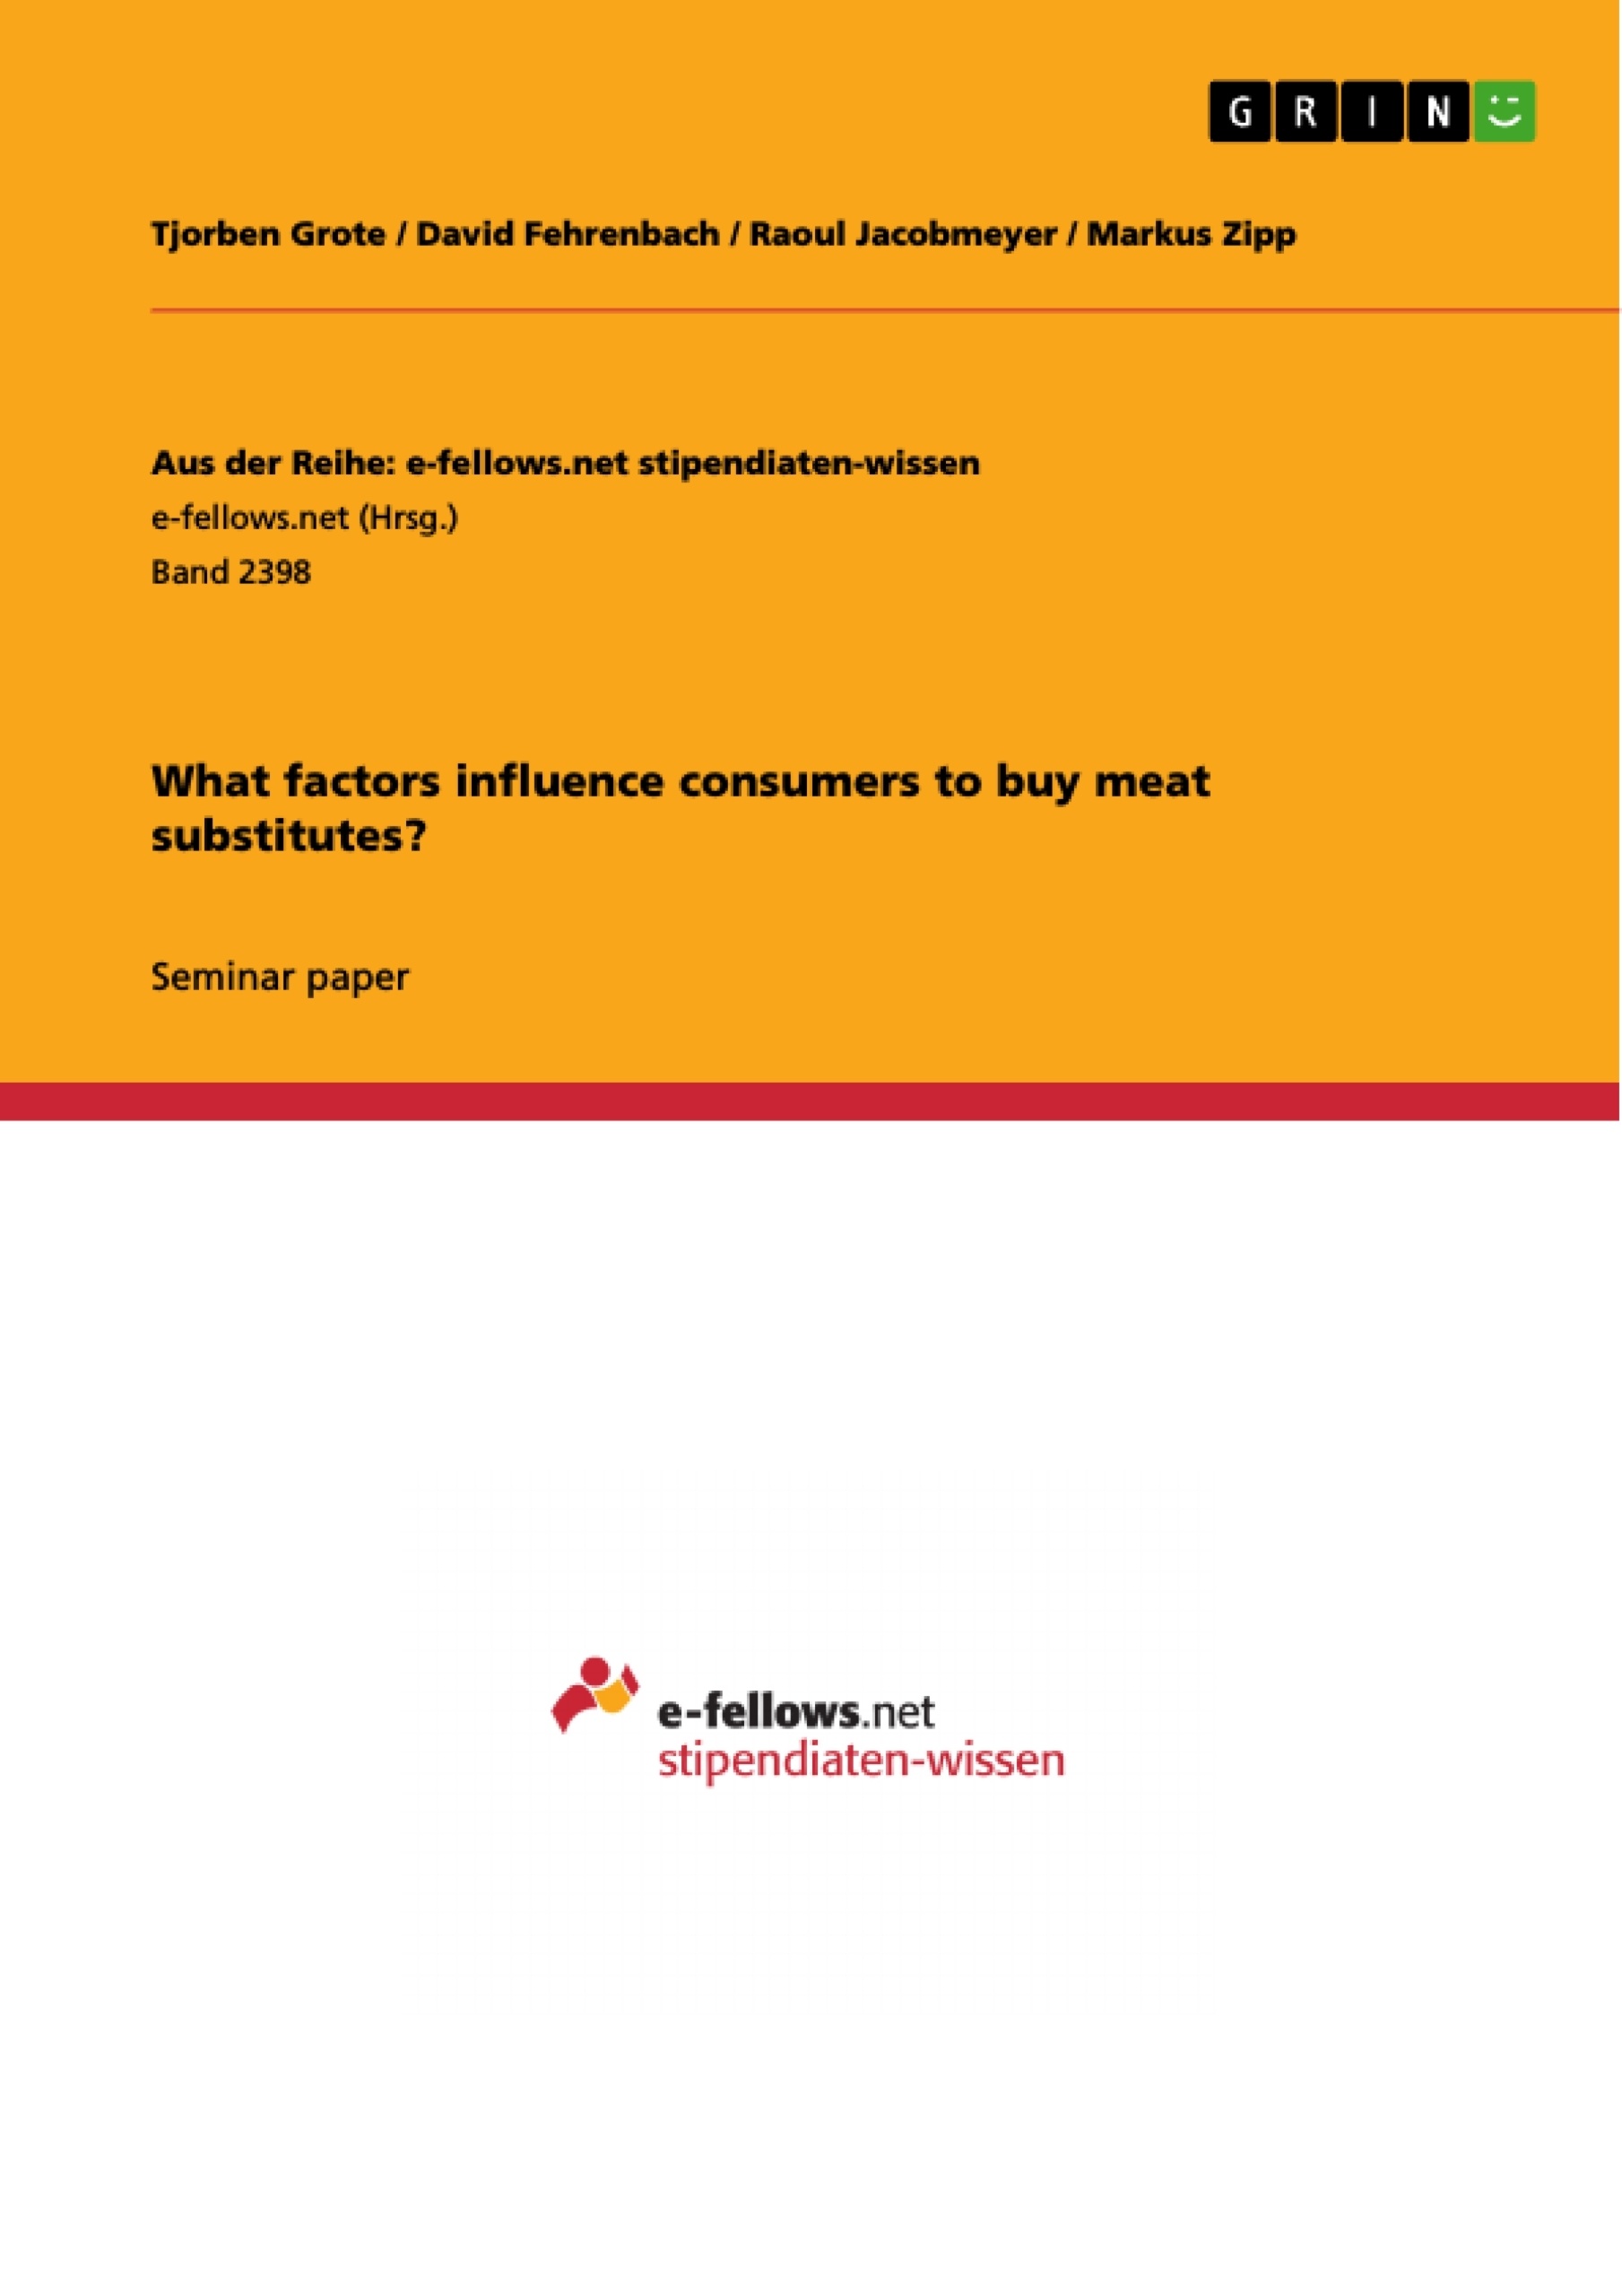 Title: What factors influence consumers to buy meat substitutes?